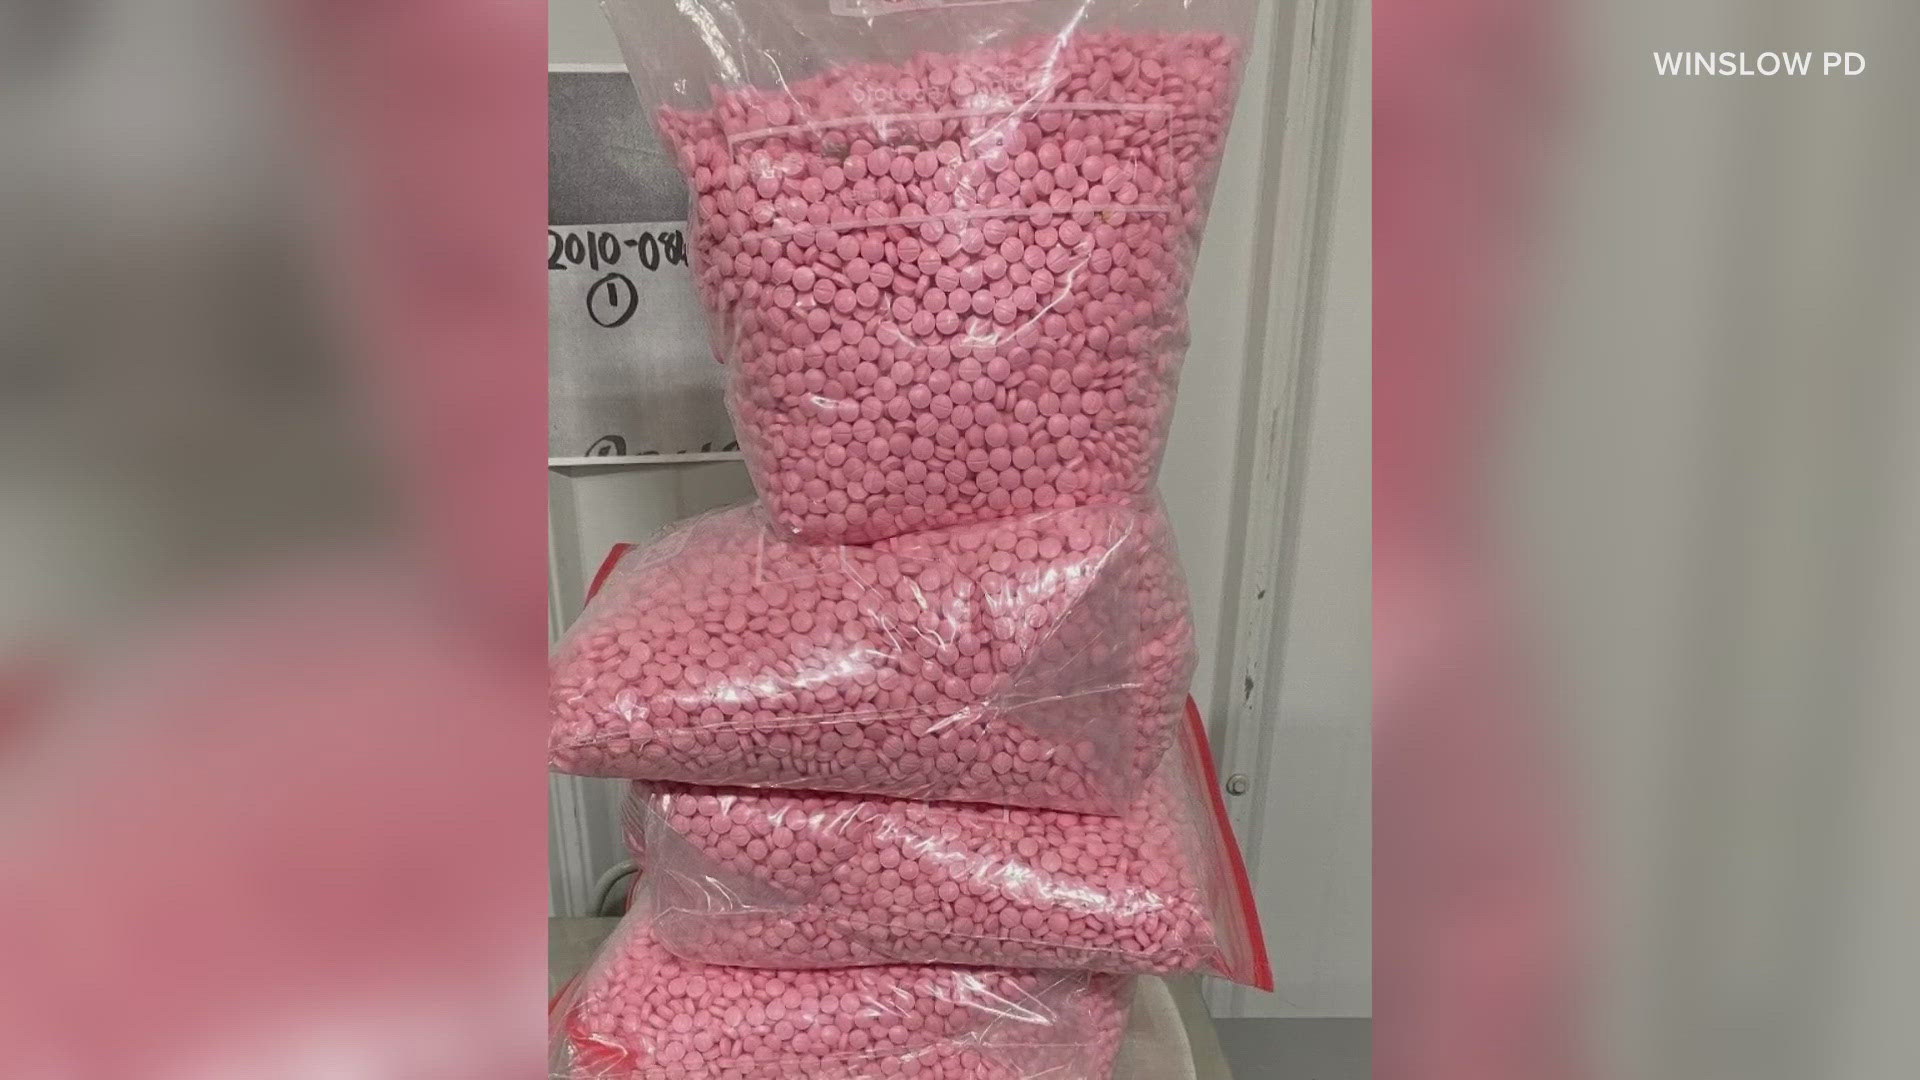 Police said a person called authorities after receiving a package containing 30 pounds of suspected fentanyl pills from California.